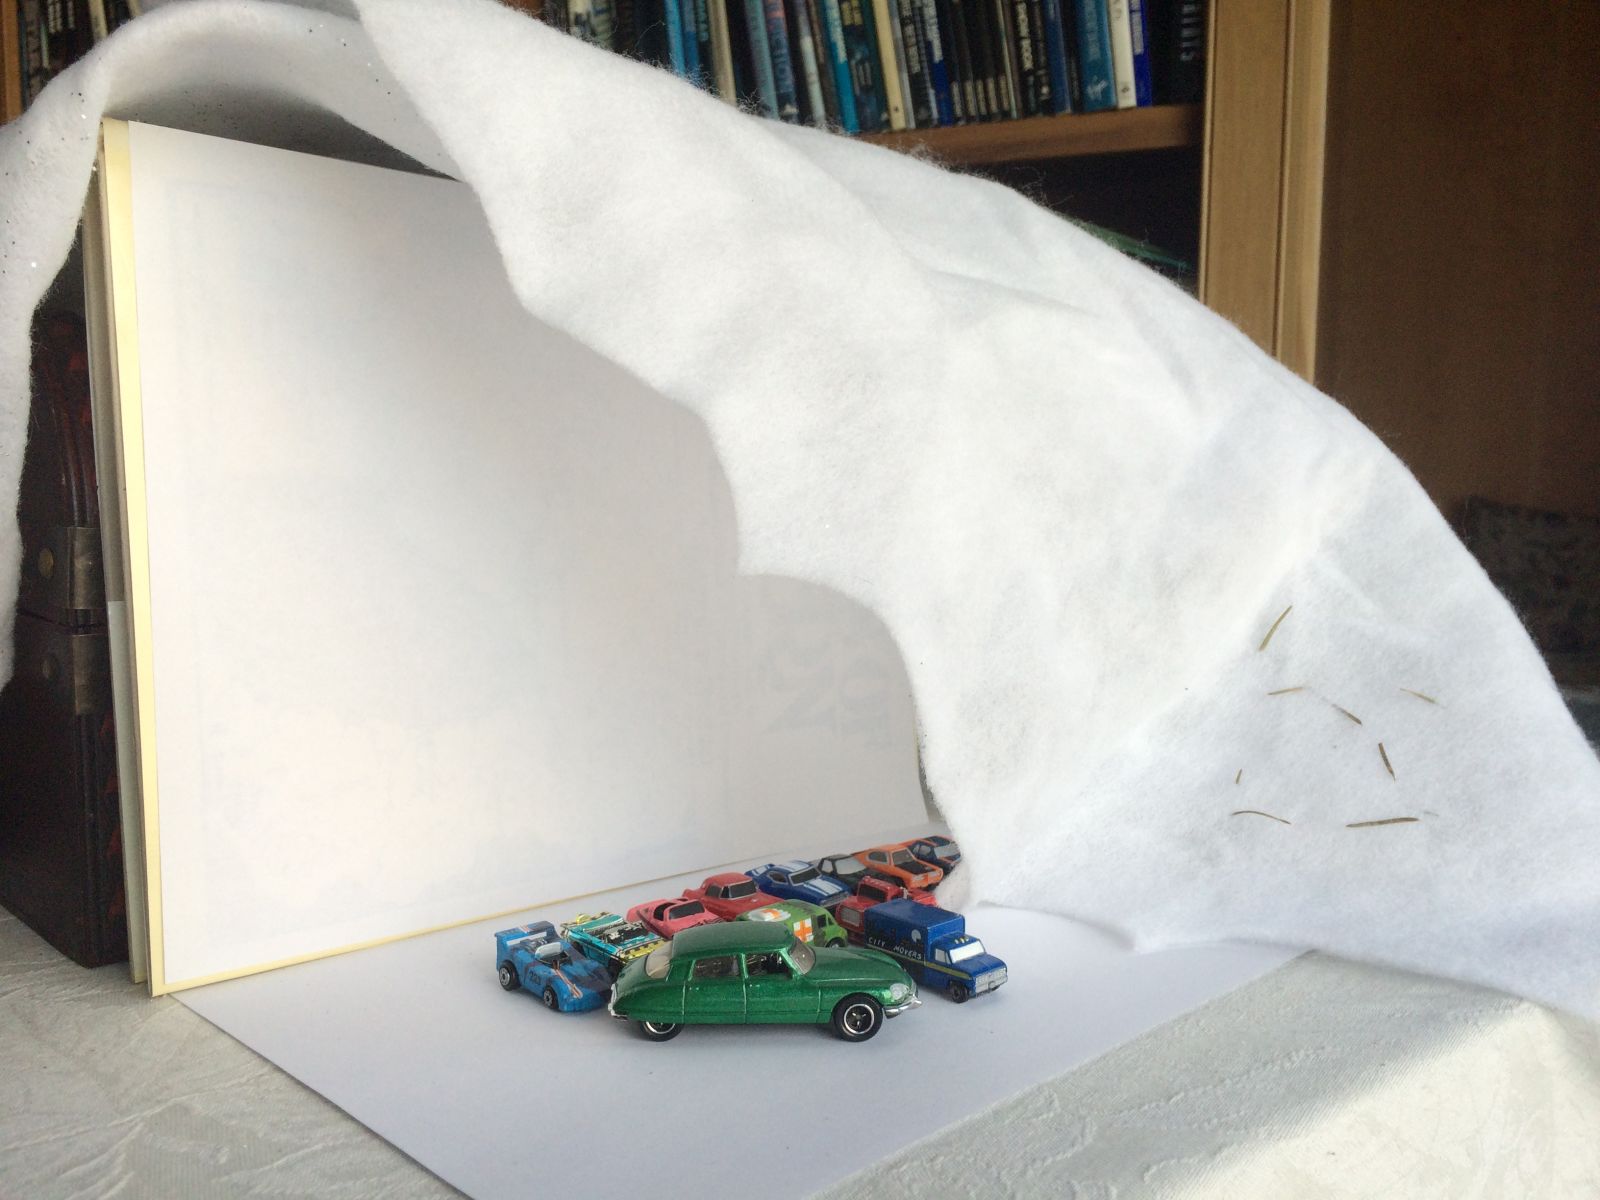 Here is my makeshift photo studio. Some paper, books, and a Christmas ‘snow’ blanket work pretty well together. 